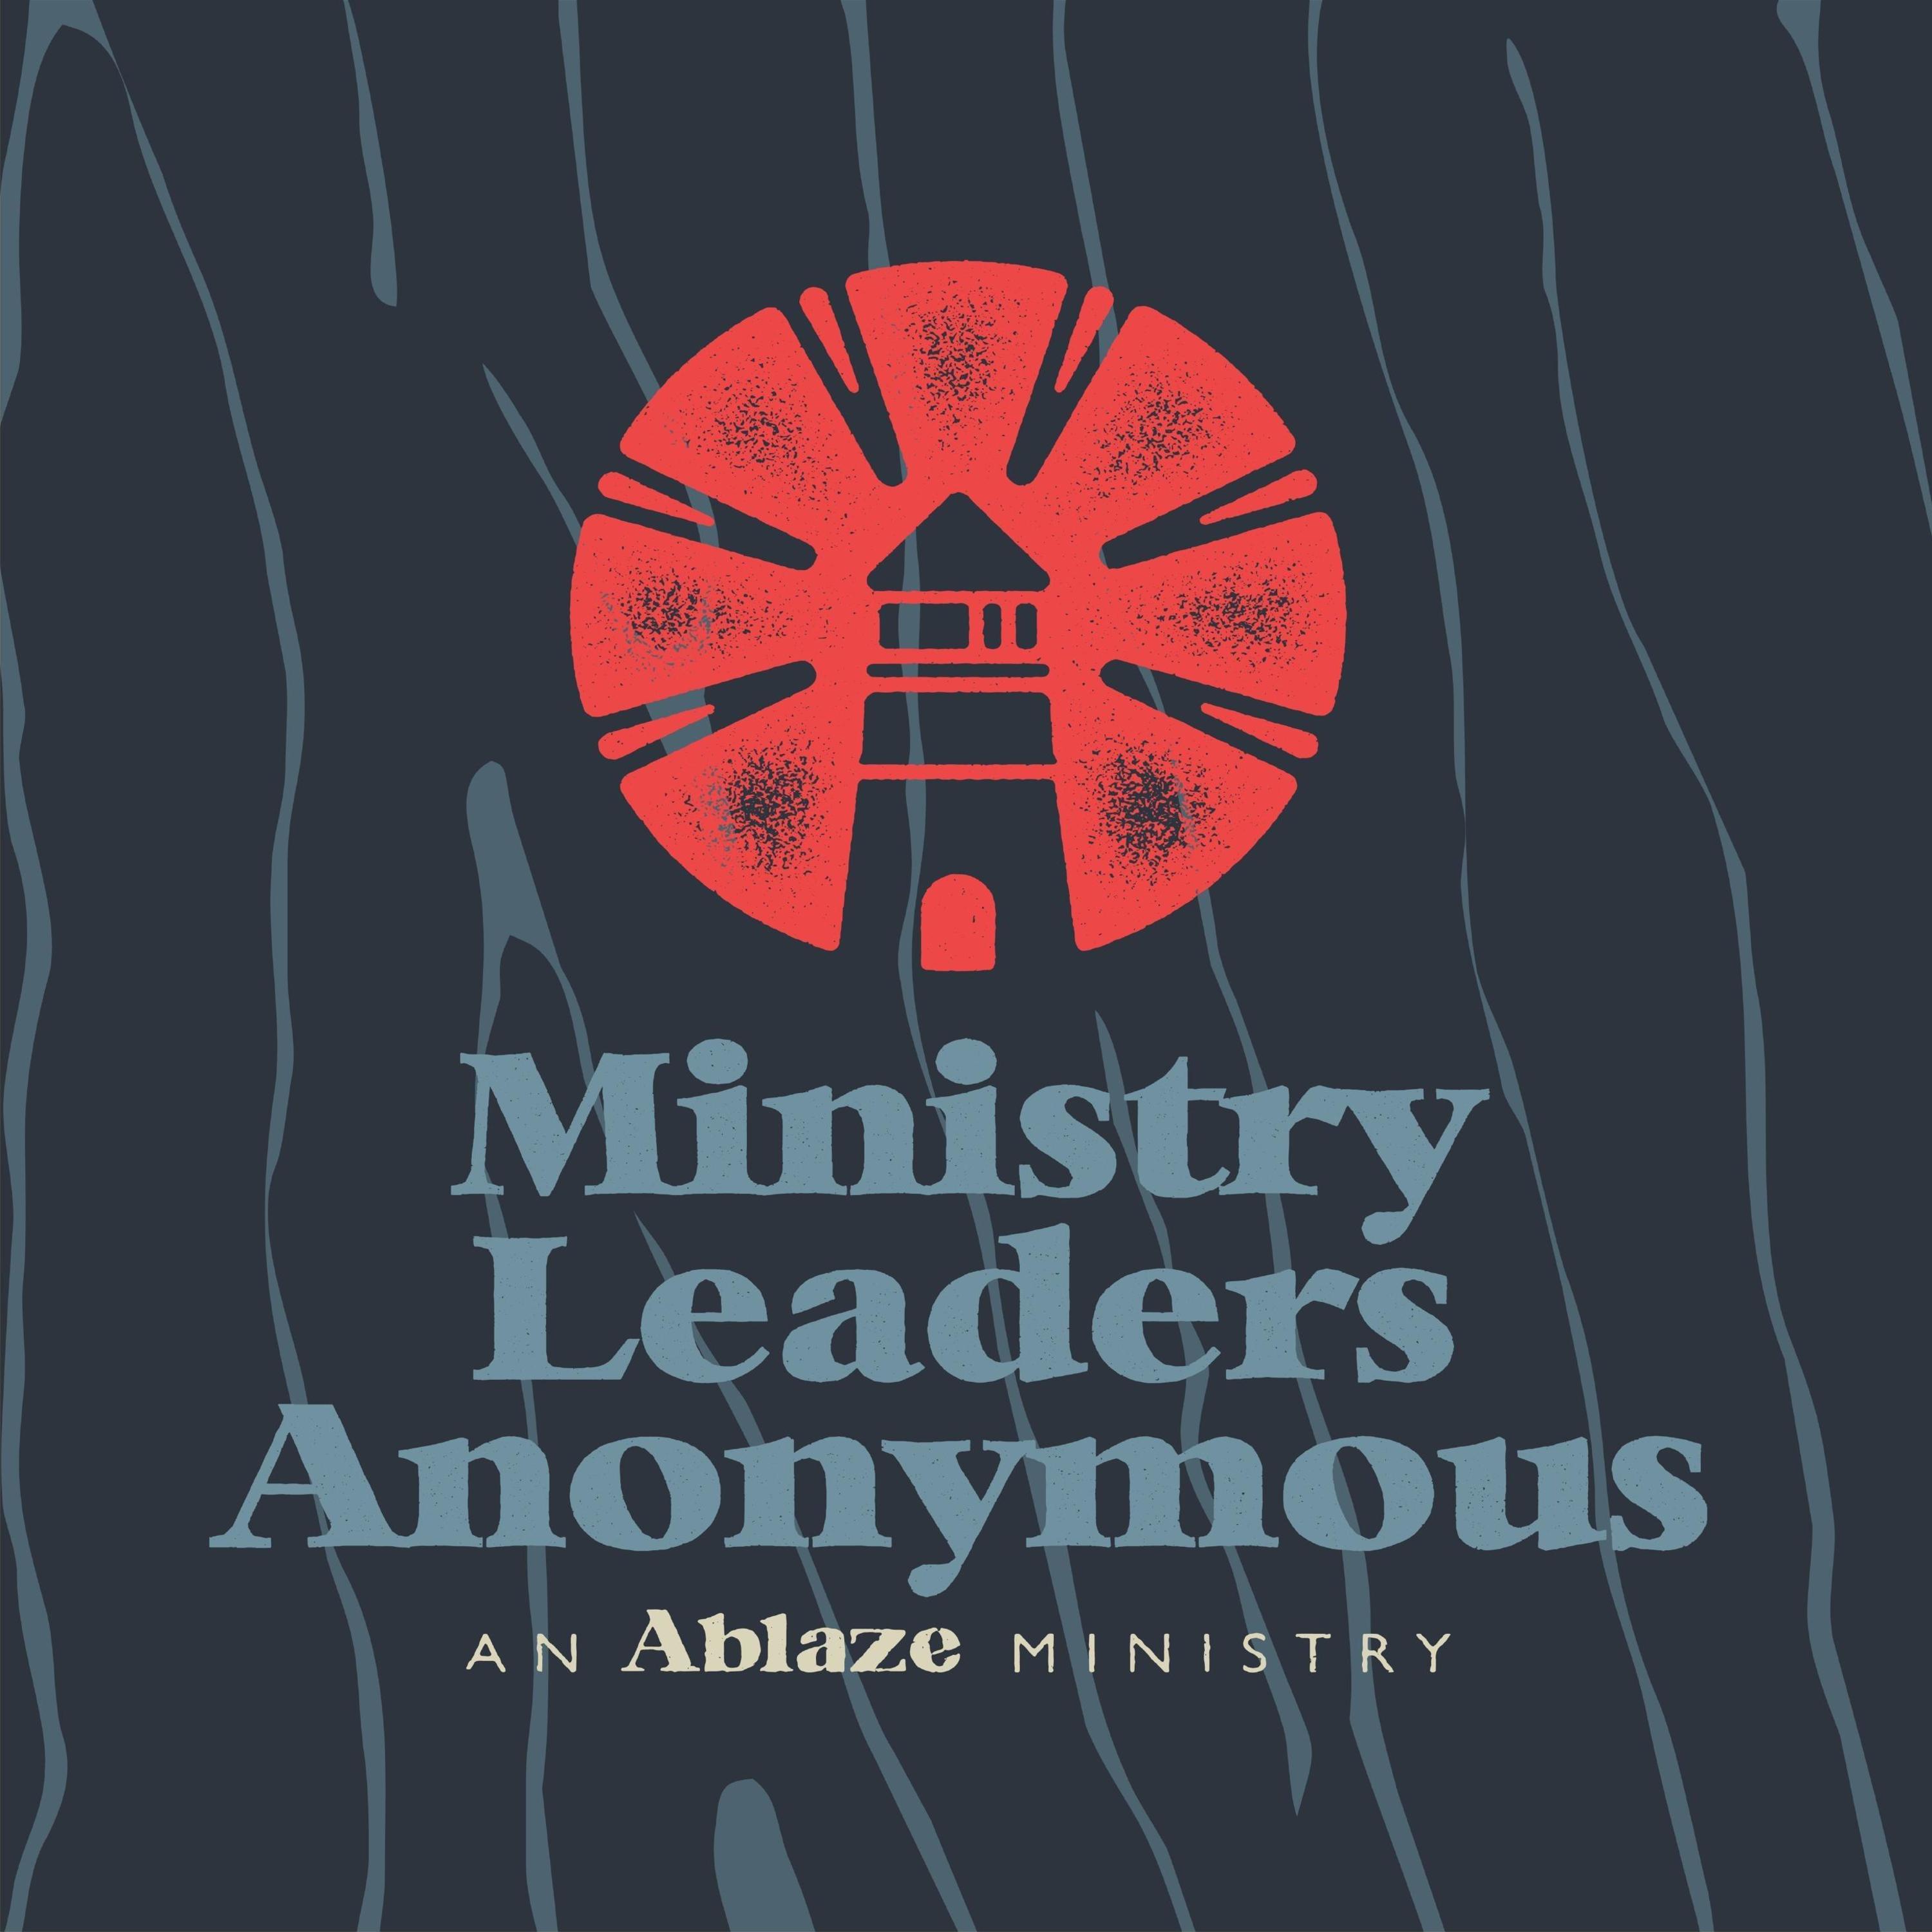 Ministry Leaders Anonymous